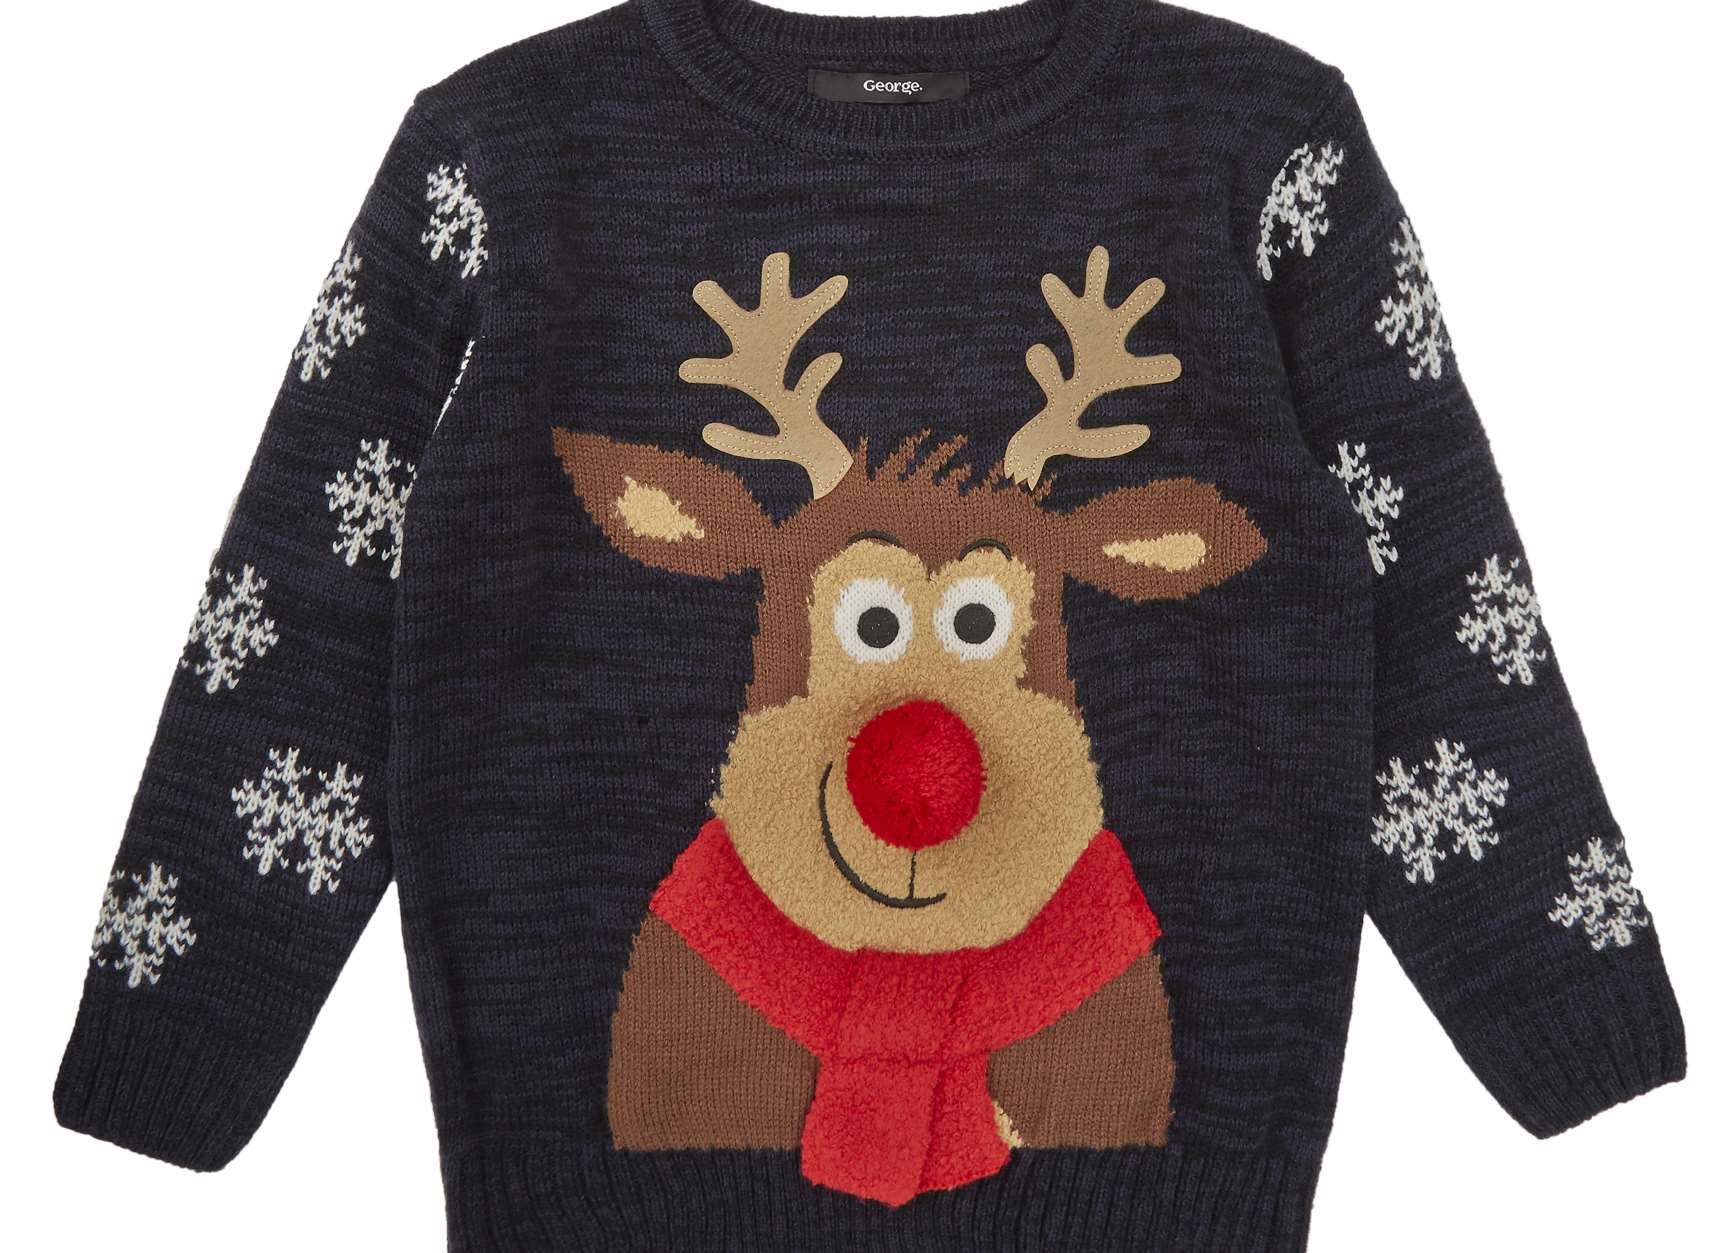 Prices start at £8 for this super cosy children's jumper from George at Asda